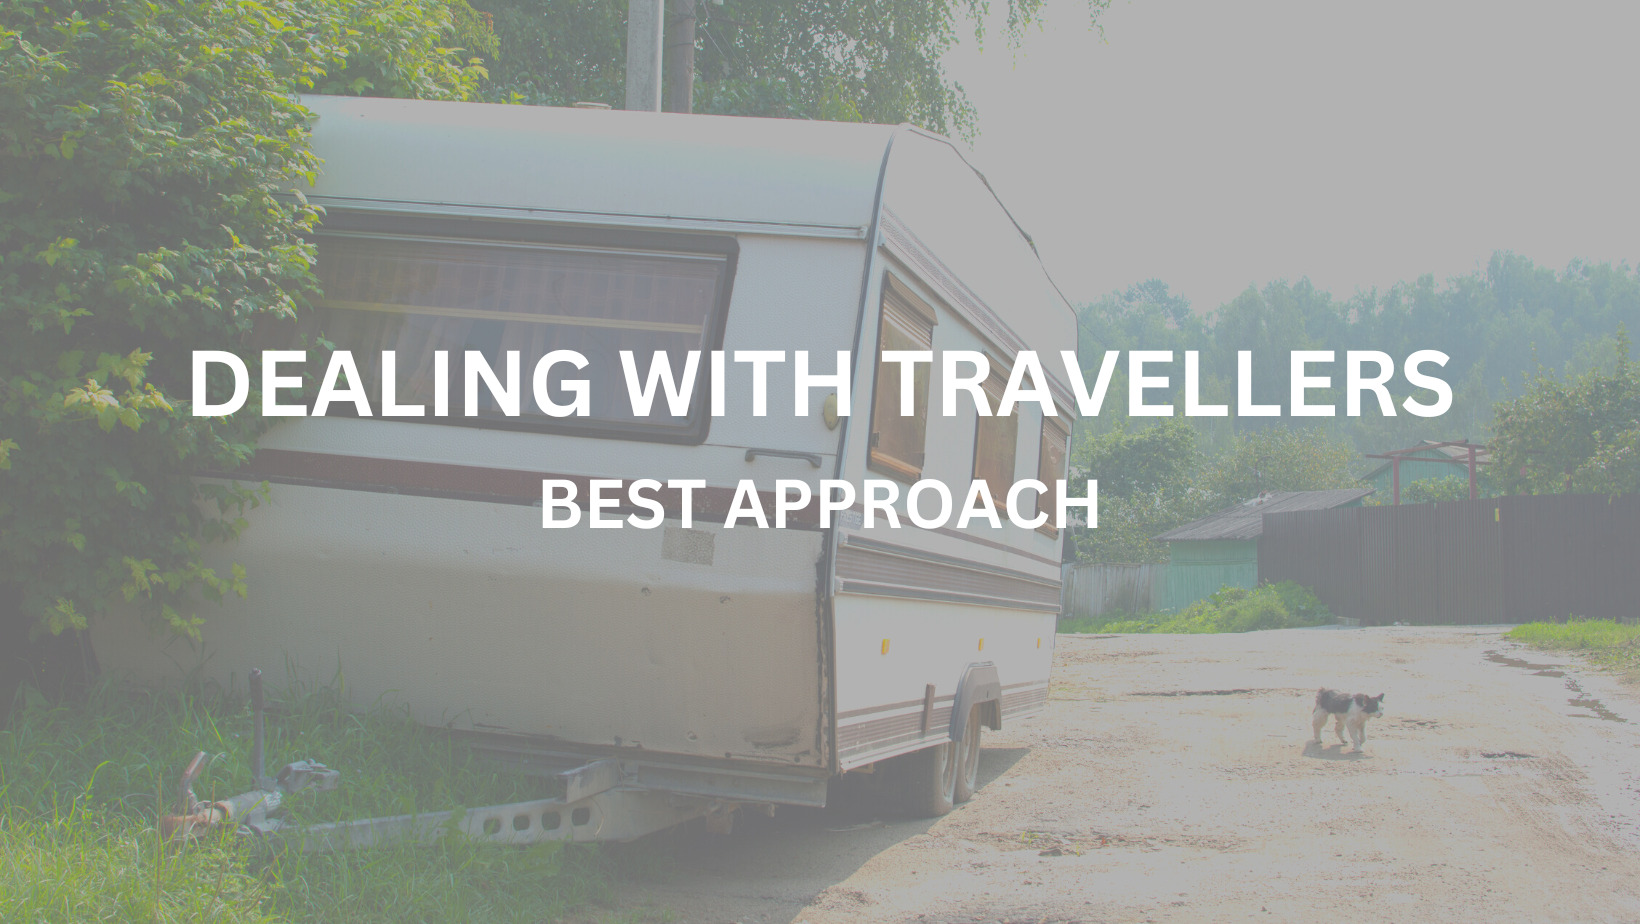 Dealing with Travellers: Best Approach